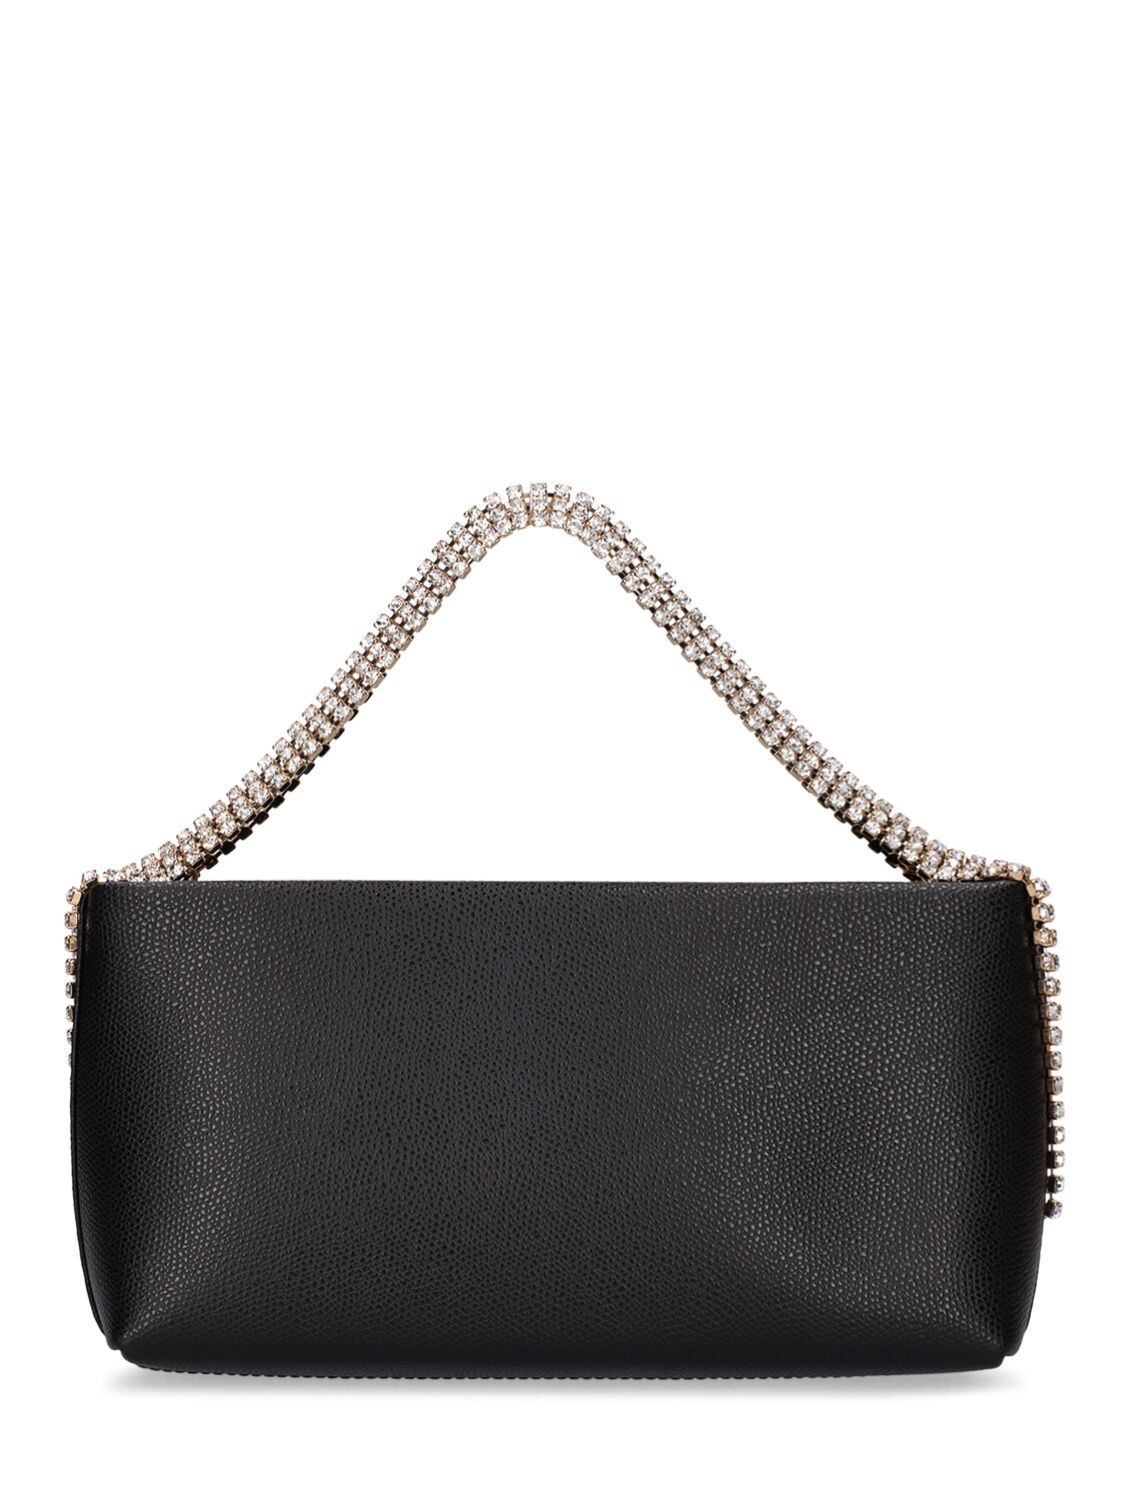 Image of Annabella Leather Top Handle Bag